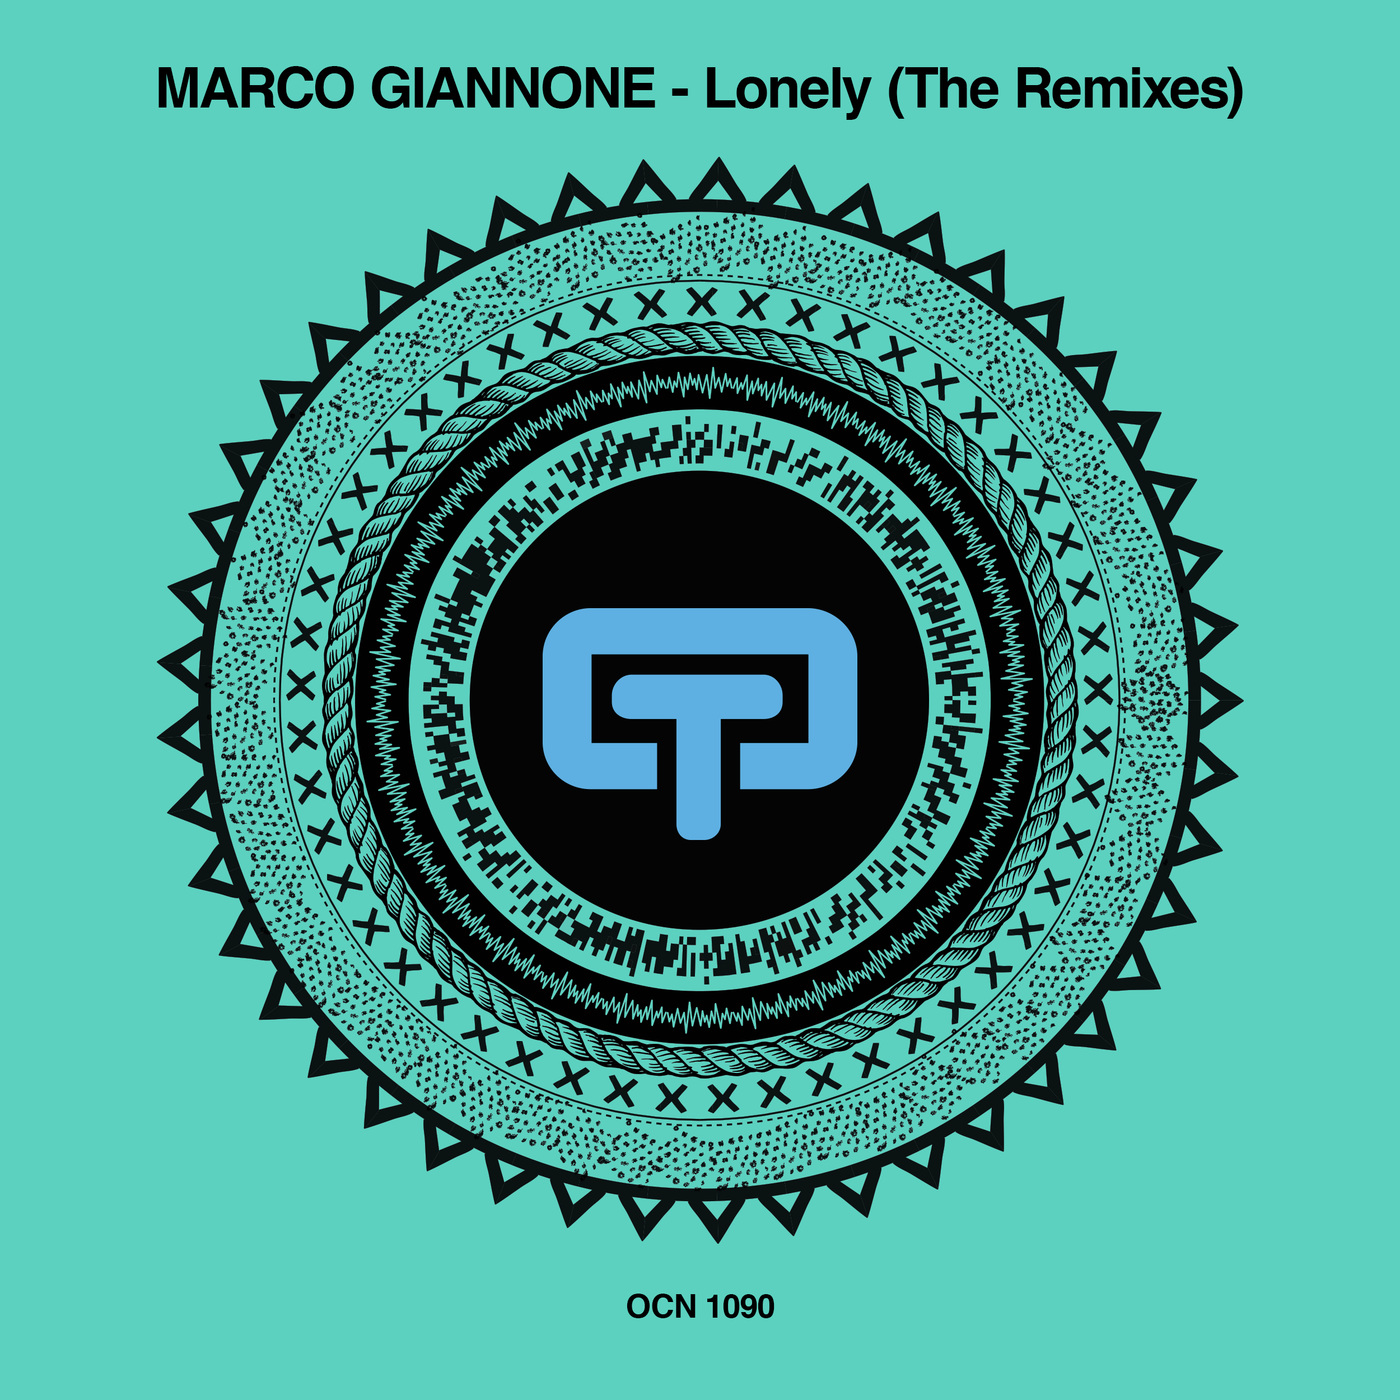 Marco Giannone - Lonely (The Remixes) / Ocean Trax